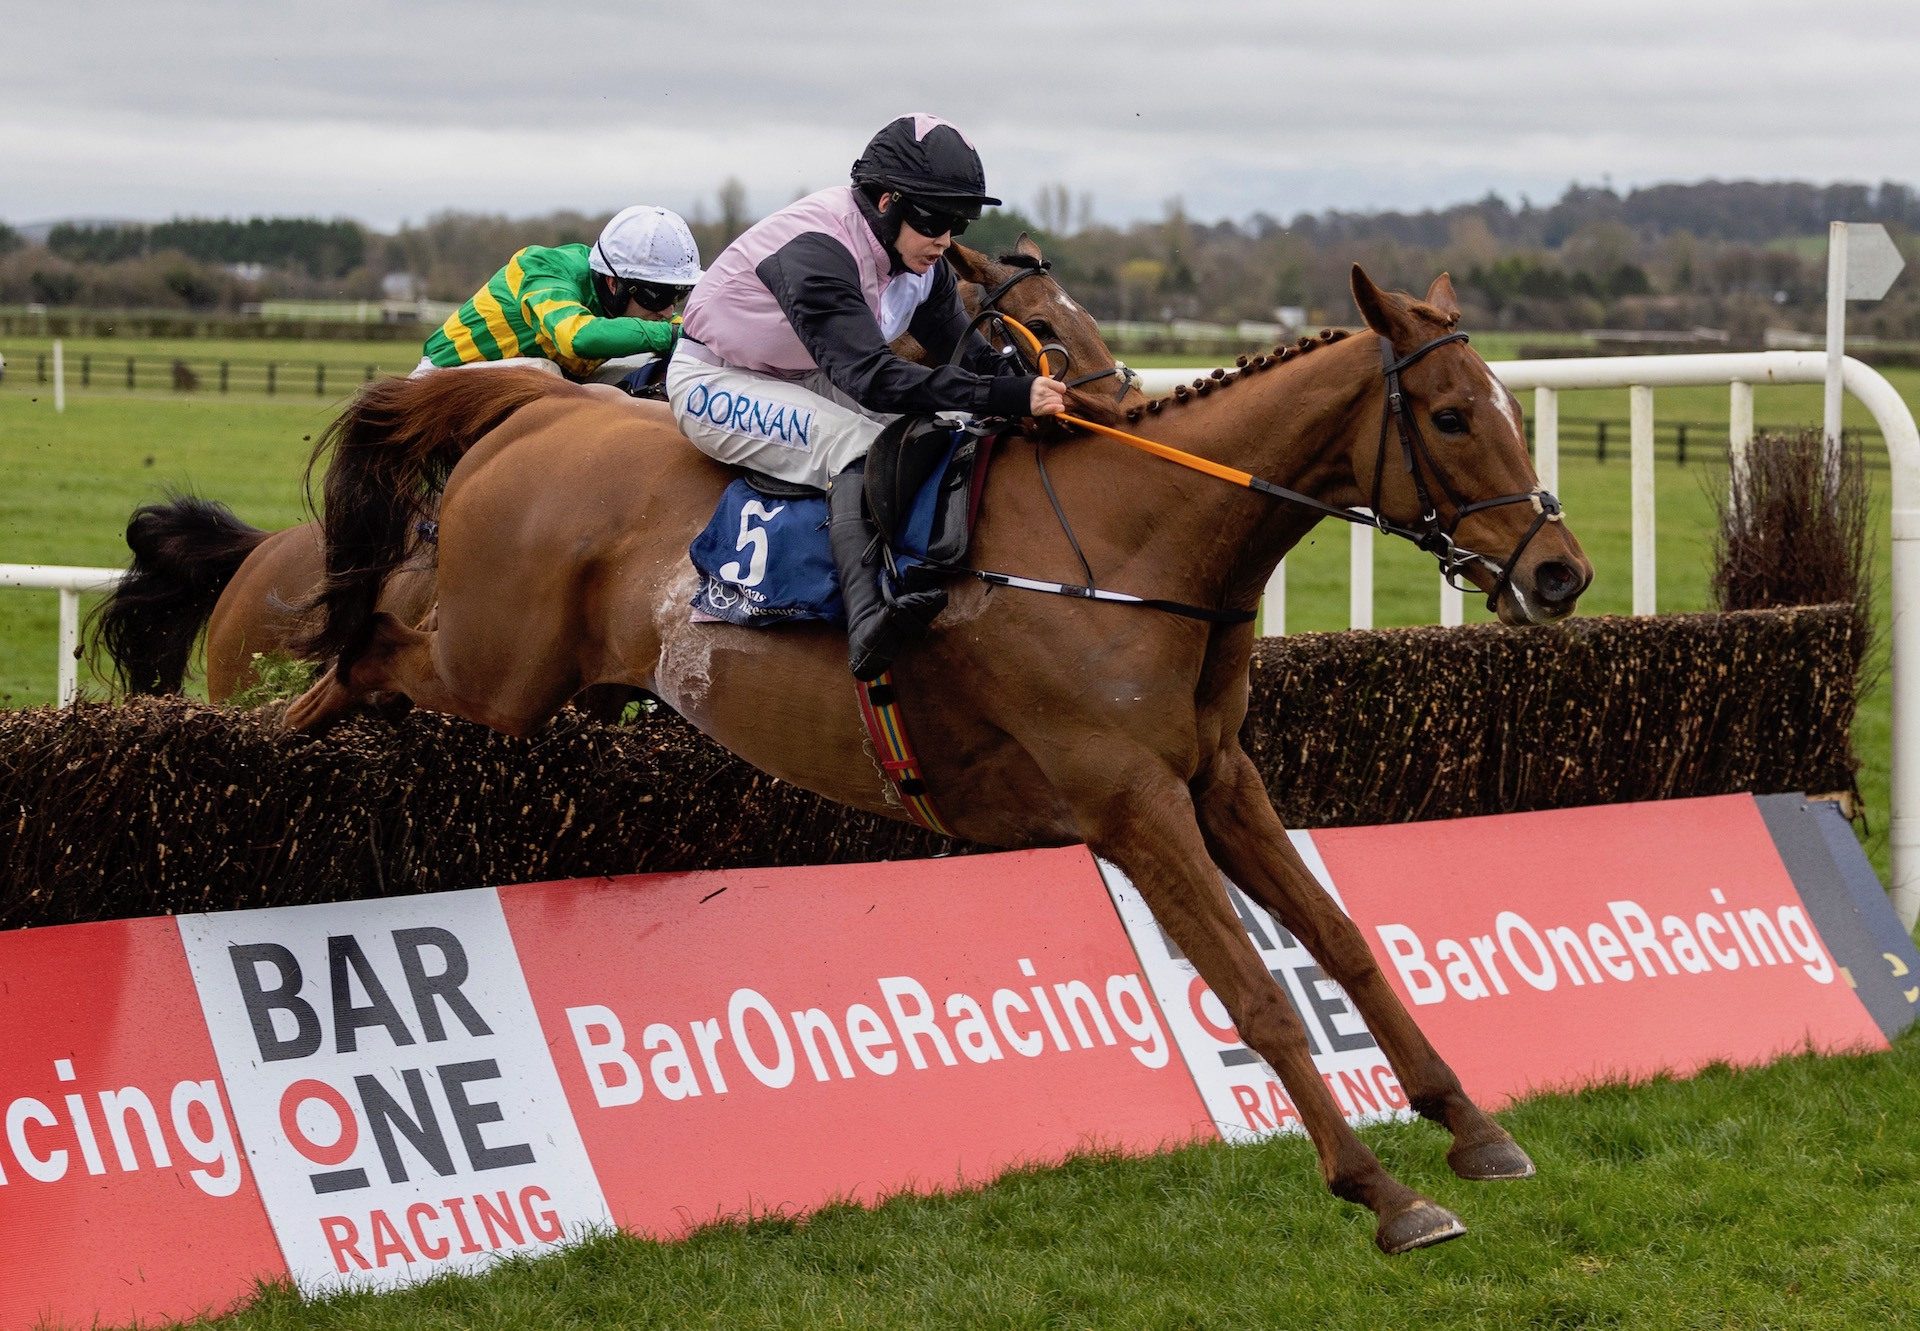 Journey With Me (Mahler) Wins The Grade 3 Directors Plate Novice Chase at Naas